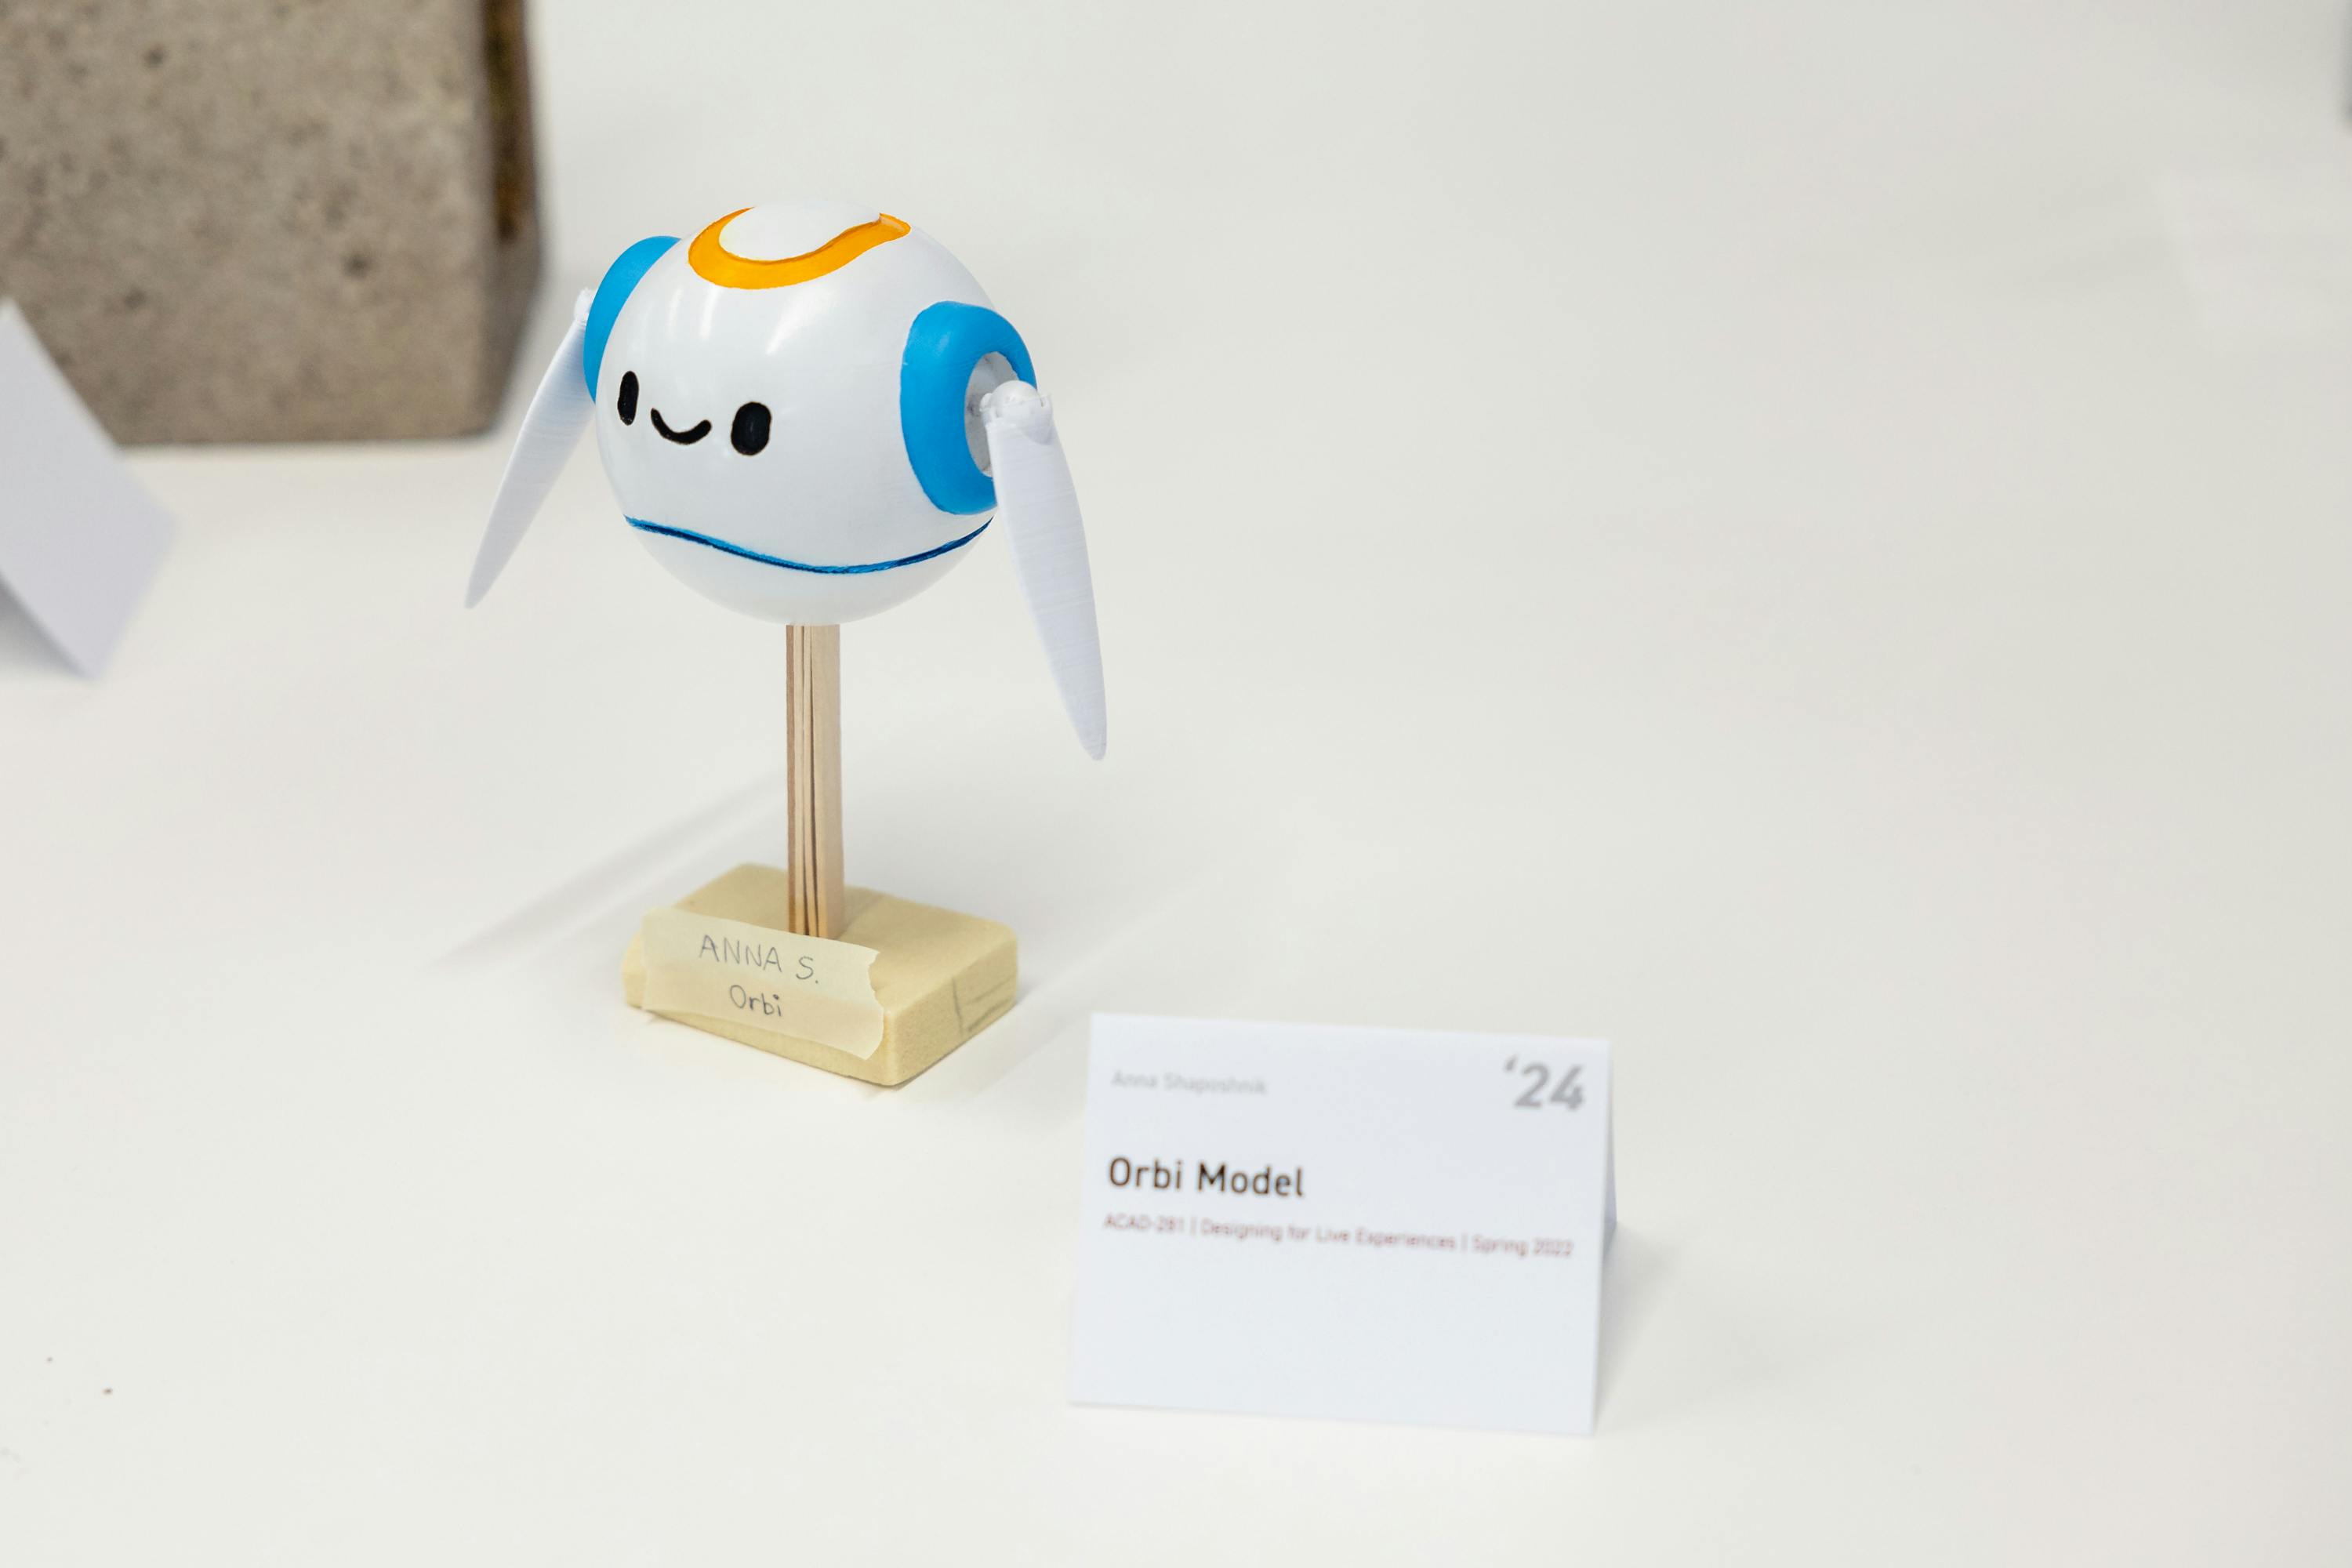 A small toy-like bot labeled "Orbi Model" sits atop a wooden stand